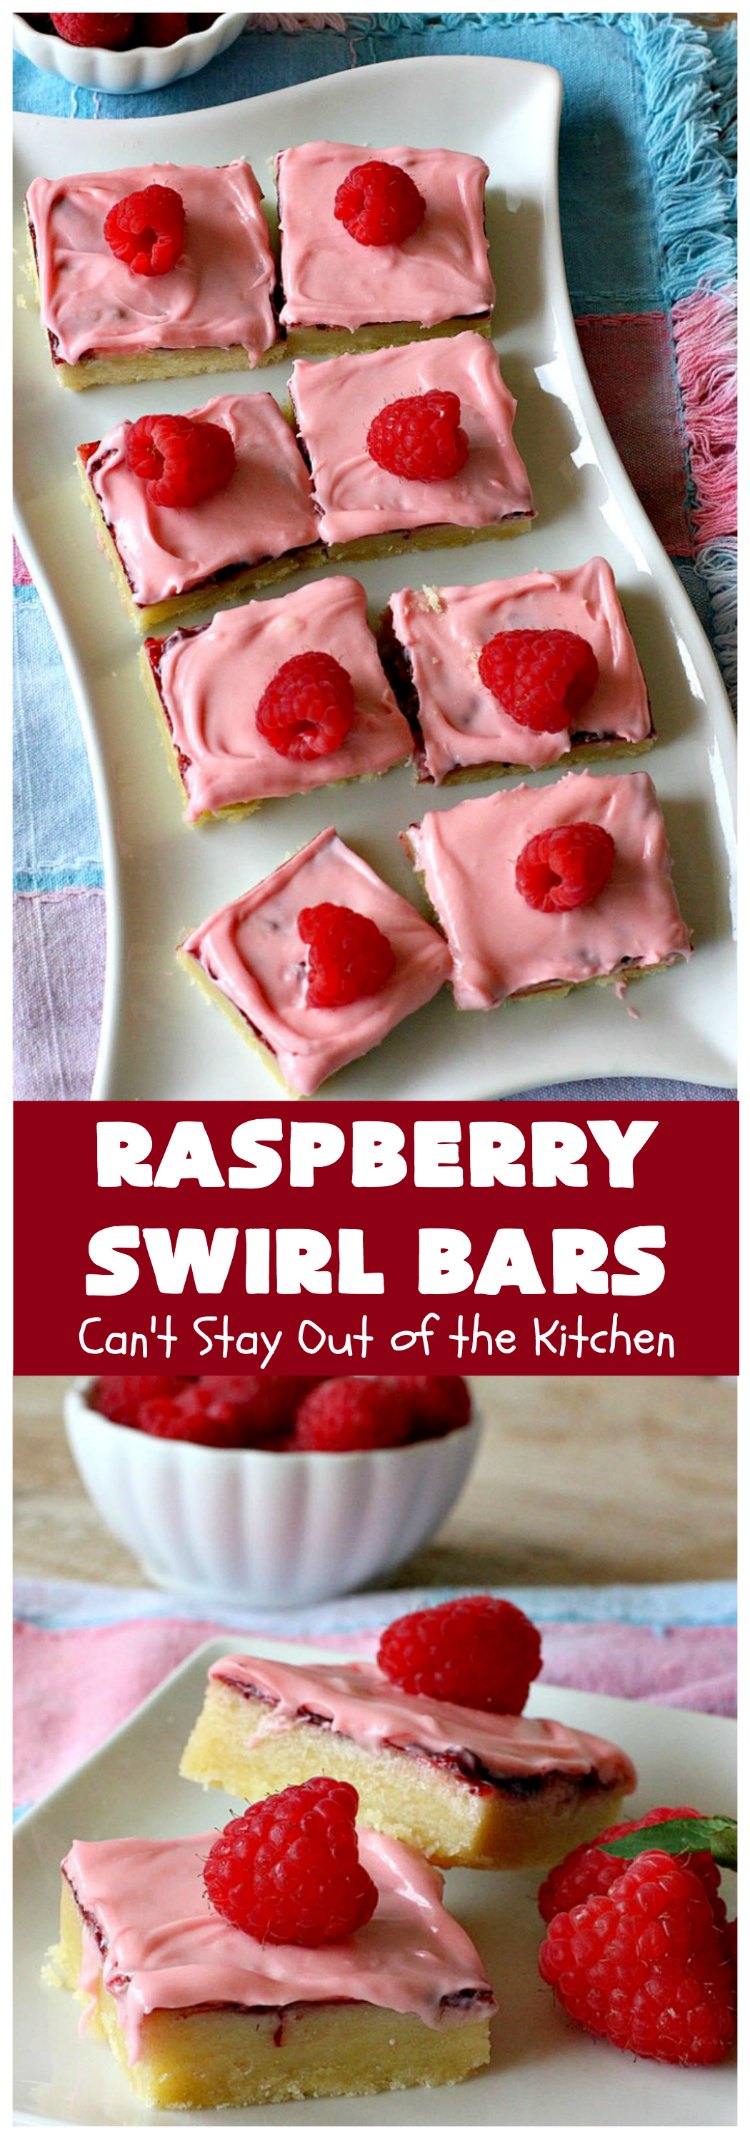 Raspberry Swirl Bars | Can't Stay Out of the Kitchen | these luscious #cookies contain #RaspberryPieFilling & have a #Raspberry #CreamCheese icing.  Great #dessert for #holidays or company. #tailgating #RaspberryDessert #RaspberrySwirlBars